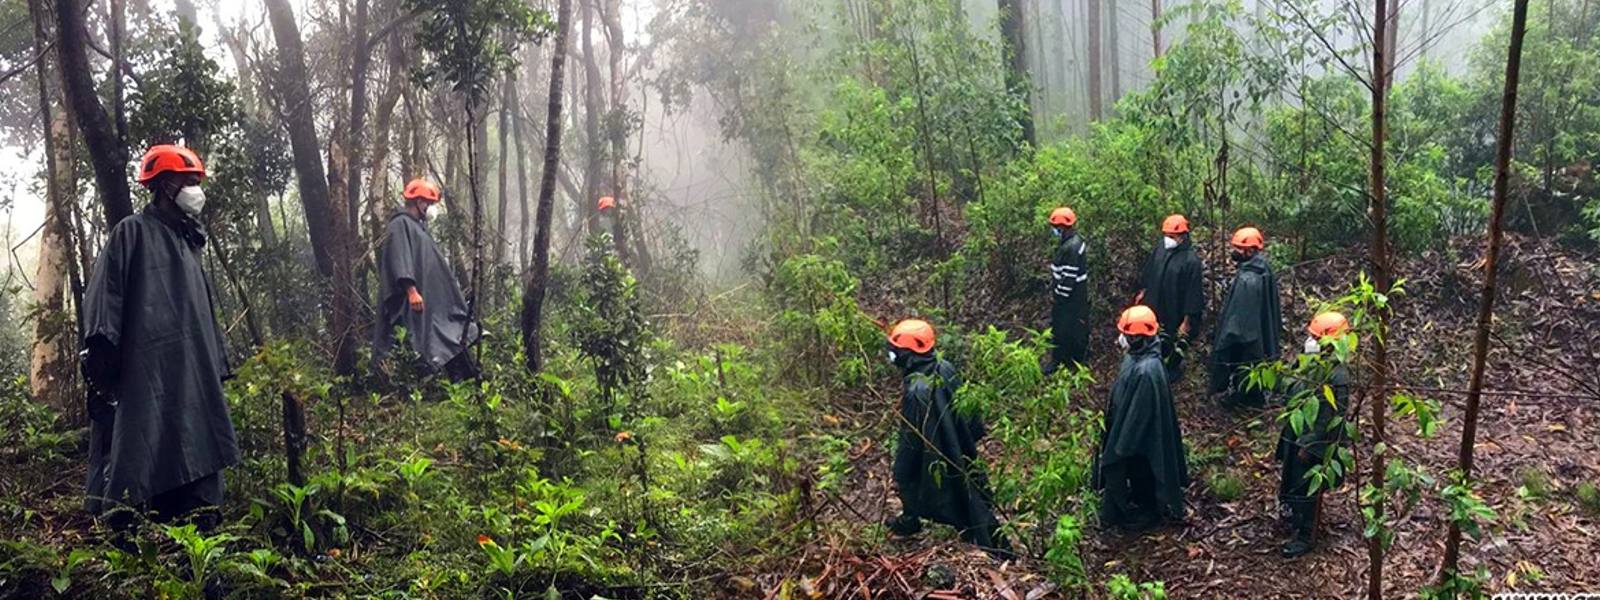 Missing Woman located after 4 days lost in N’Eliya Jungle